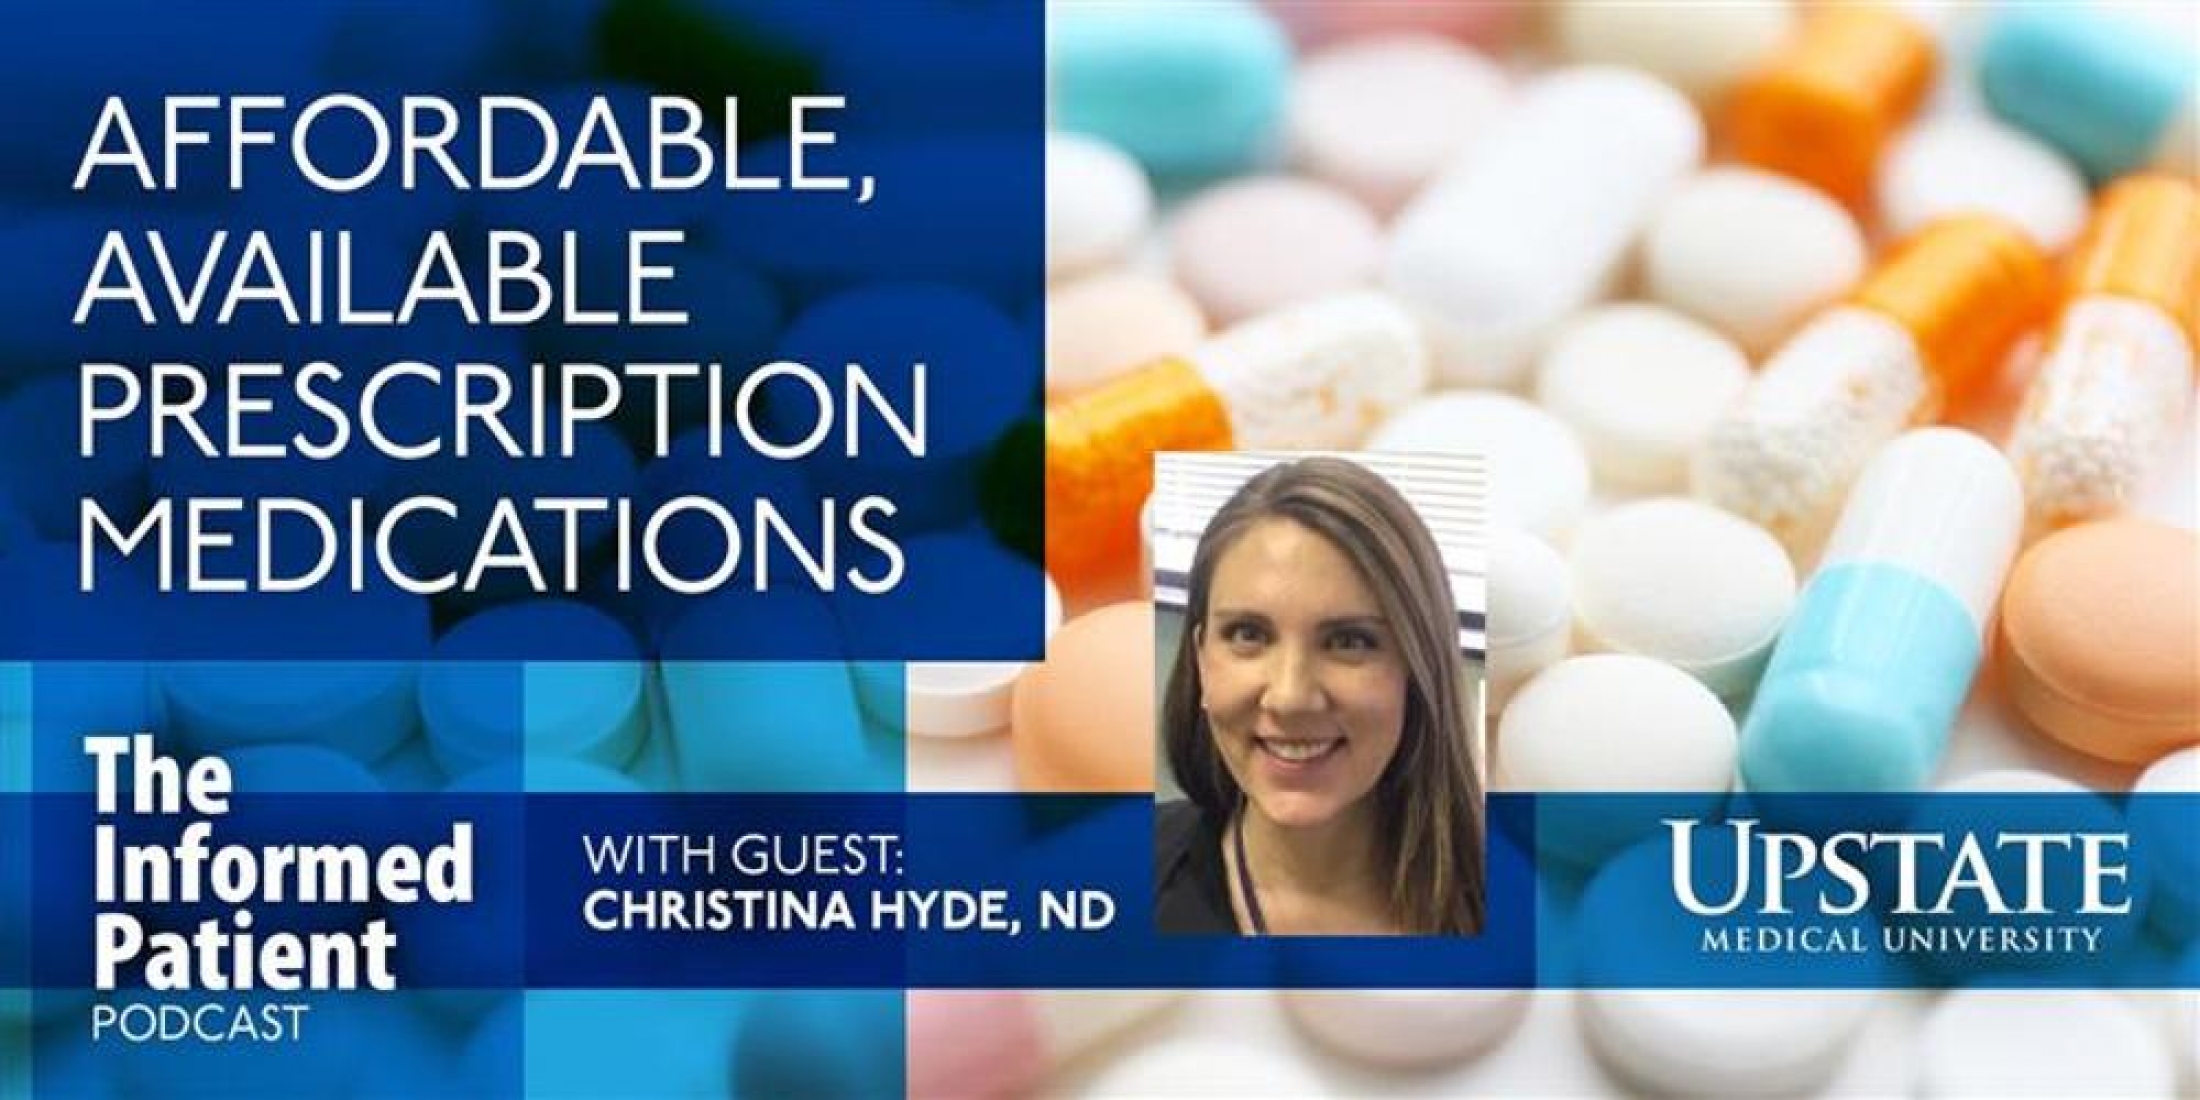 Affordable, available prescription medications, with guest Christina Hyde, ND, on Upstate's The Informed Patient podcast